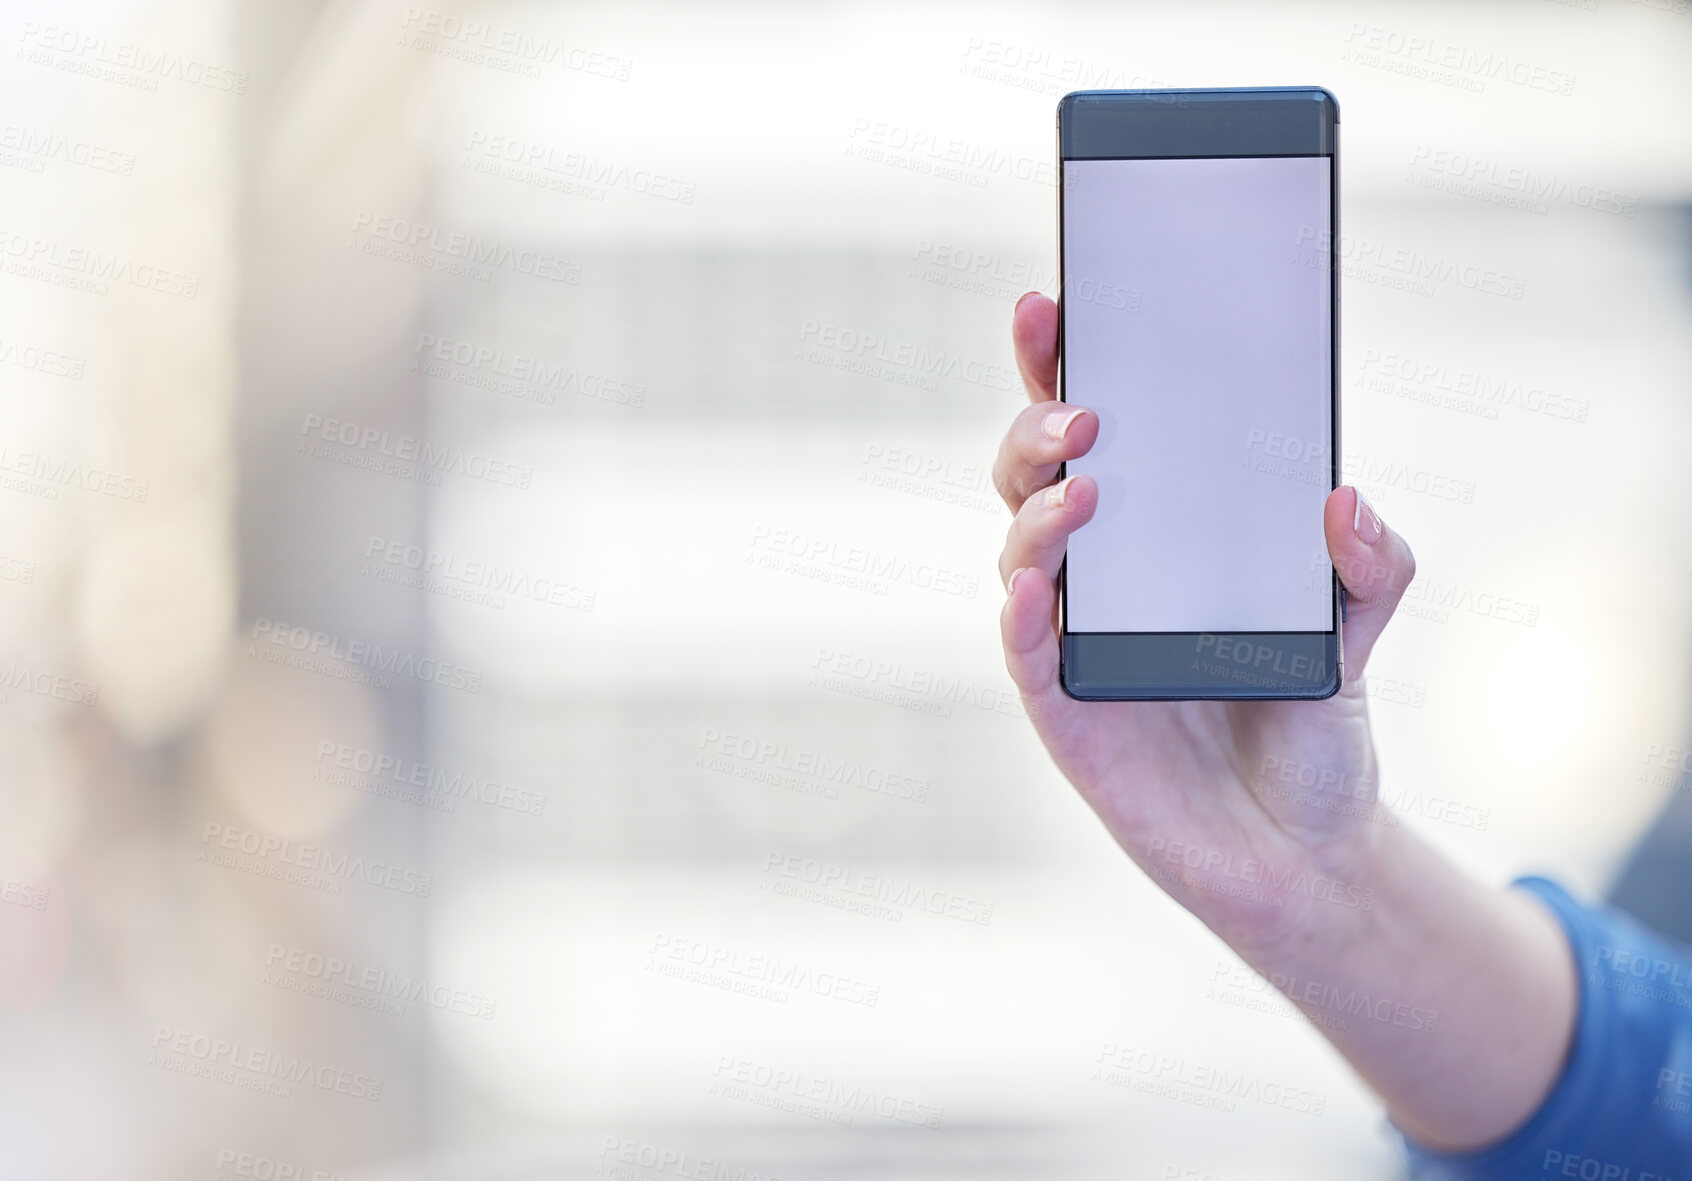 Buy stock photo Shot of a businesswoman holding a smartphone showing its screen